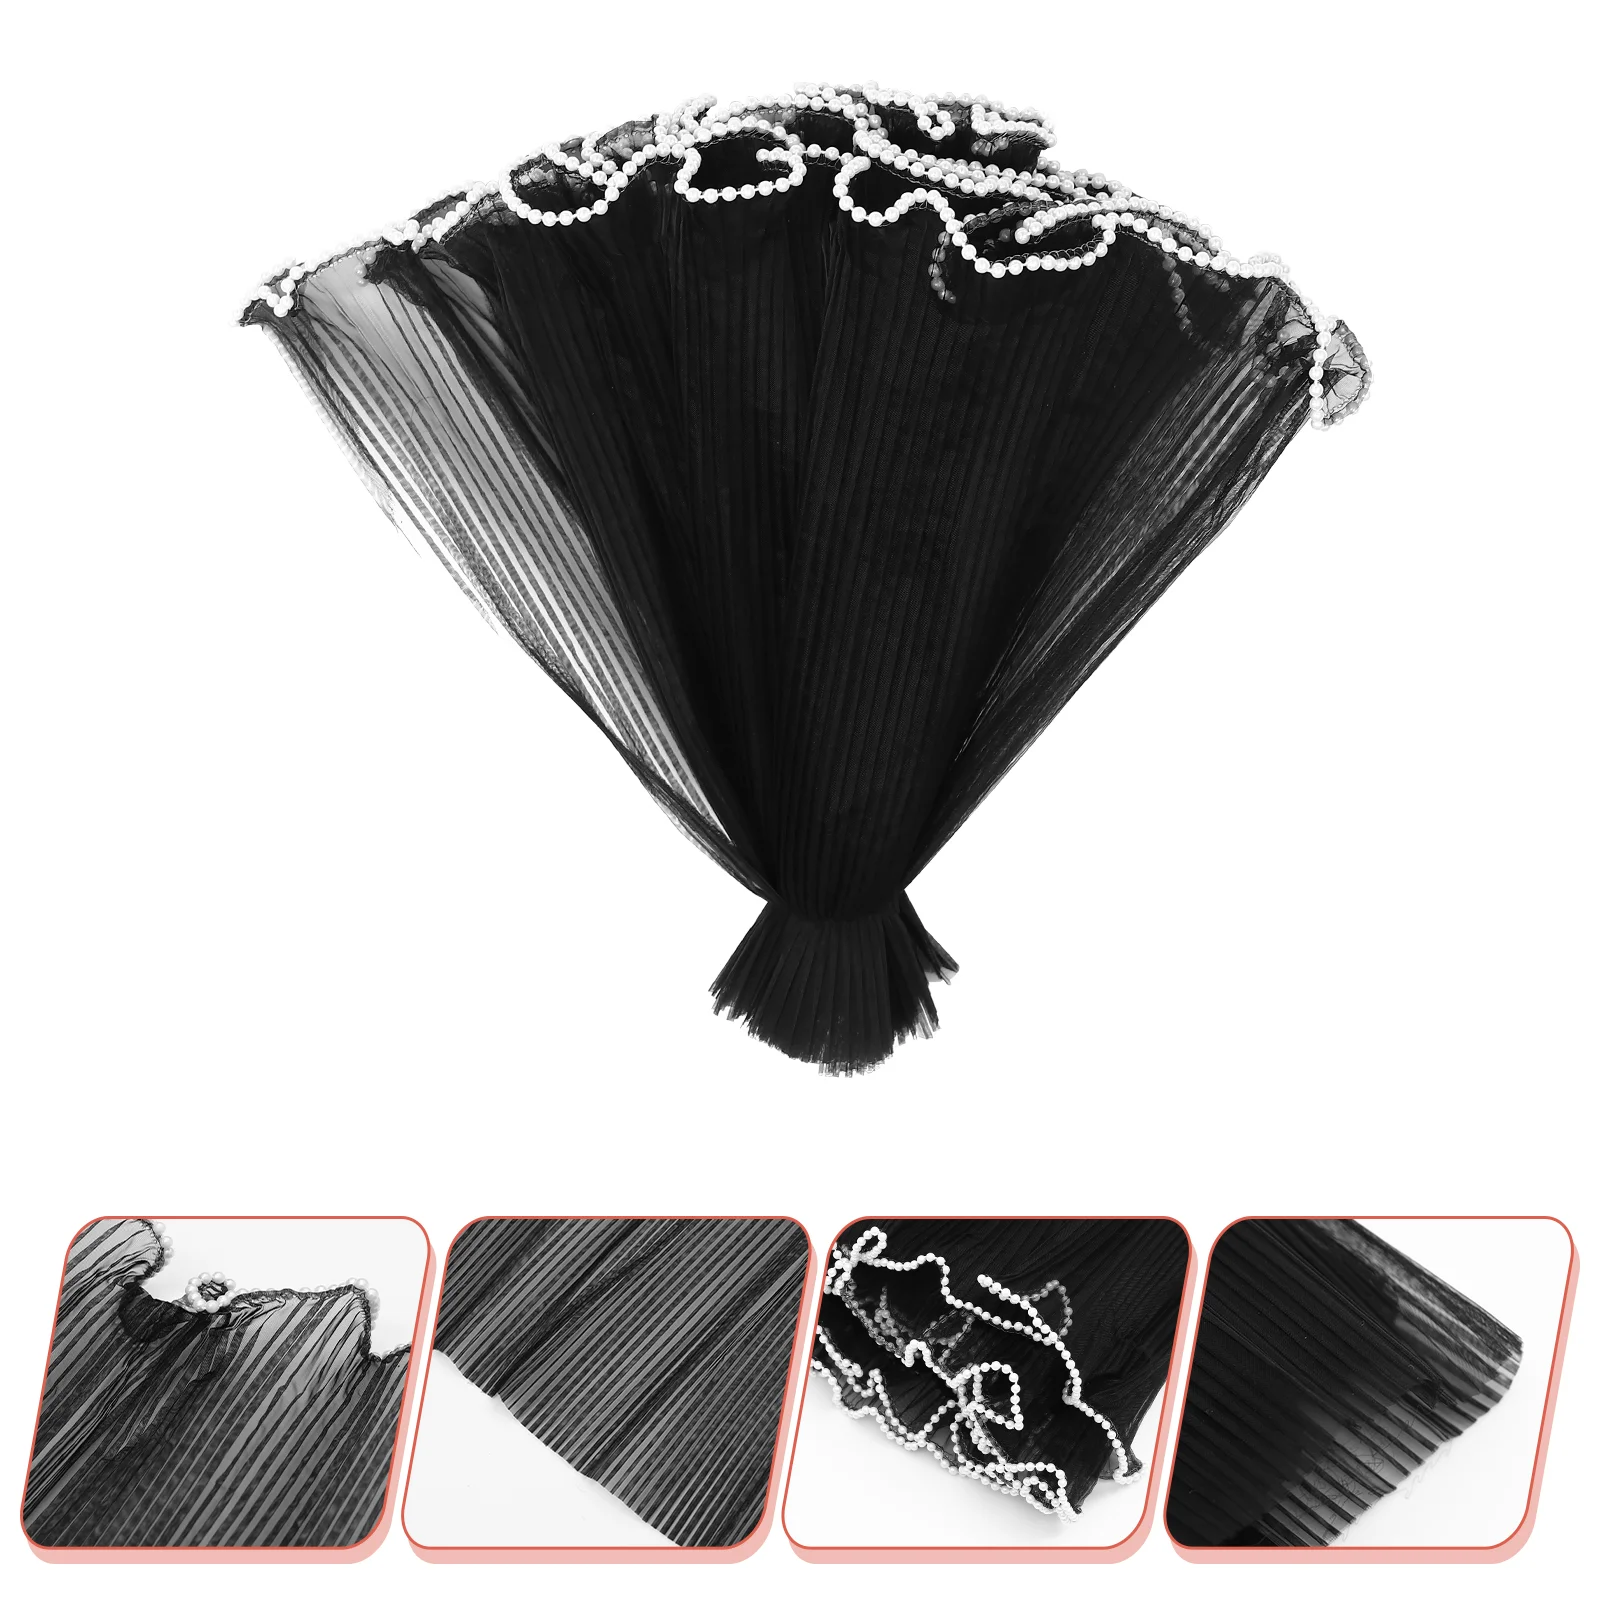 

Bouquet Paper Florist Wrapper Gift Flower Wrapping Cellophane Polyester Wrap Sheets Net Arrangement Sleeve Packing Floral